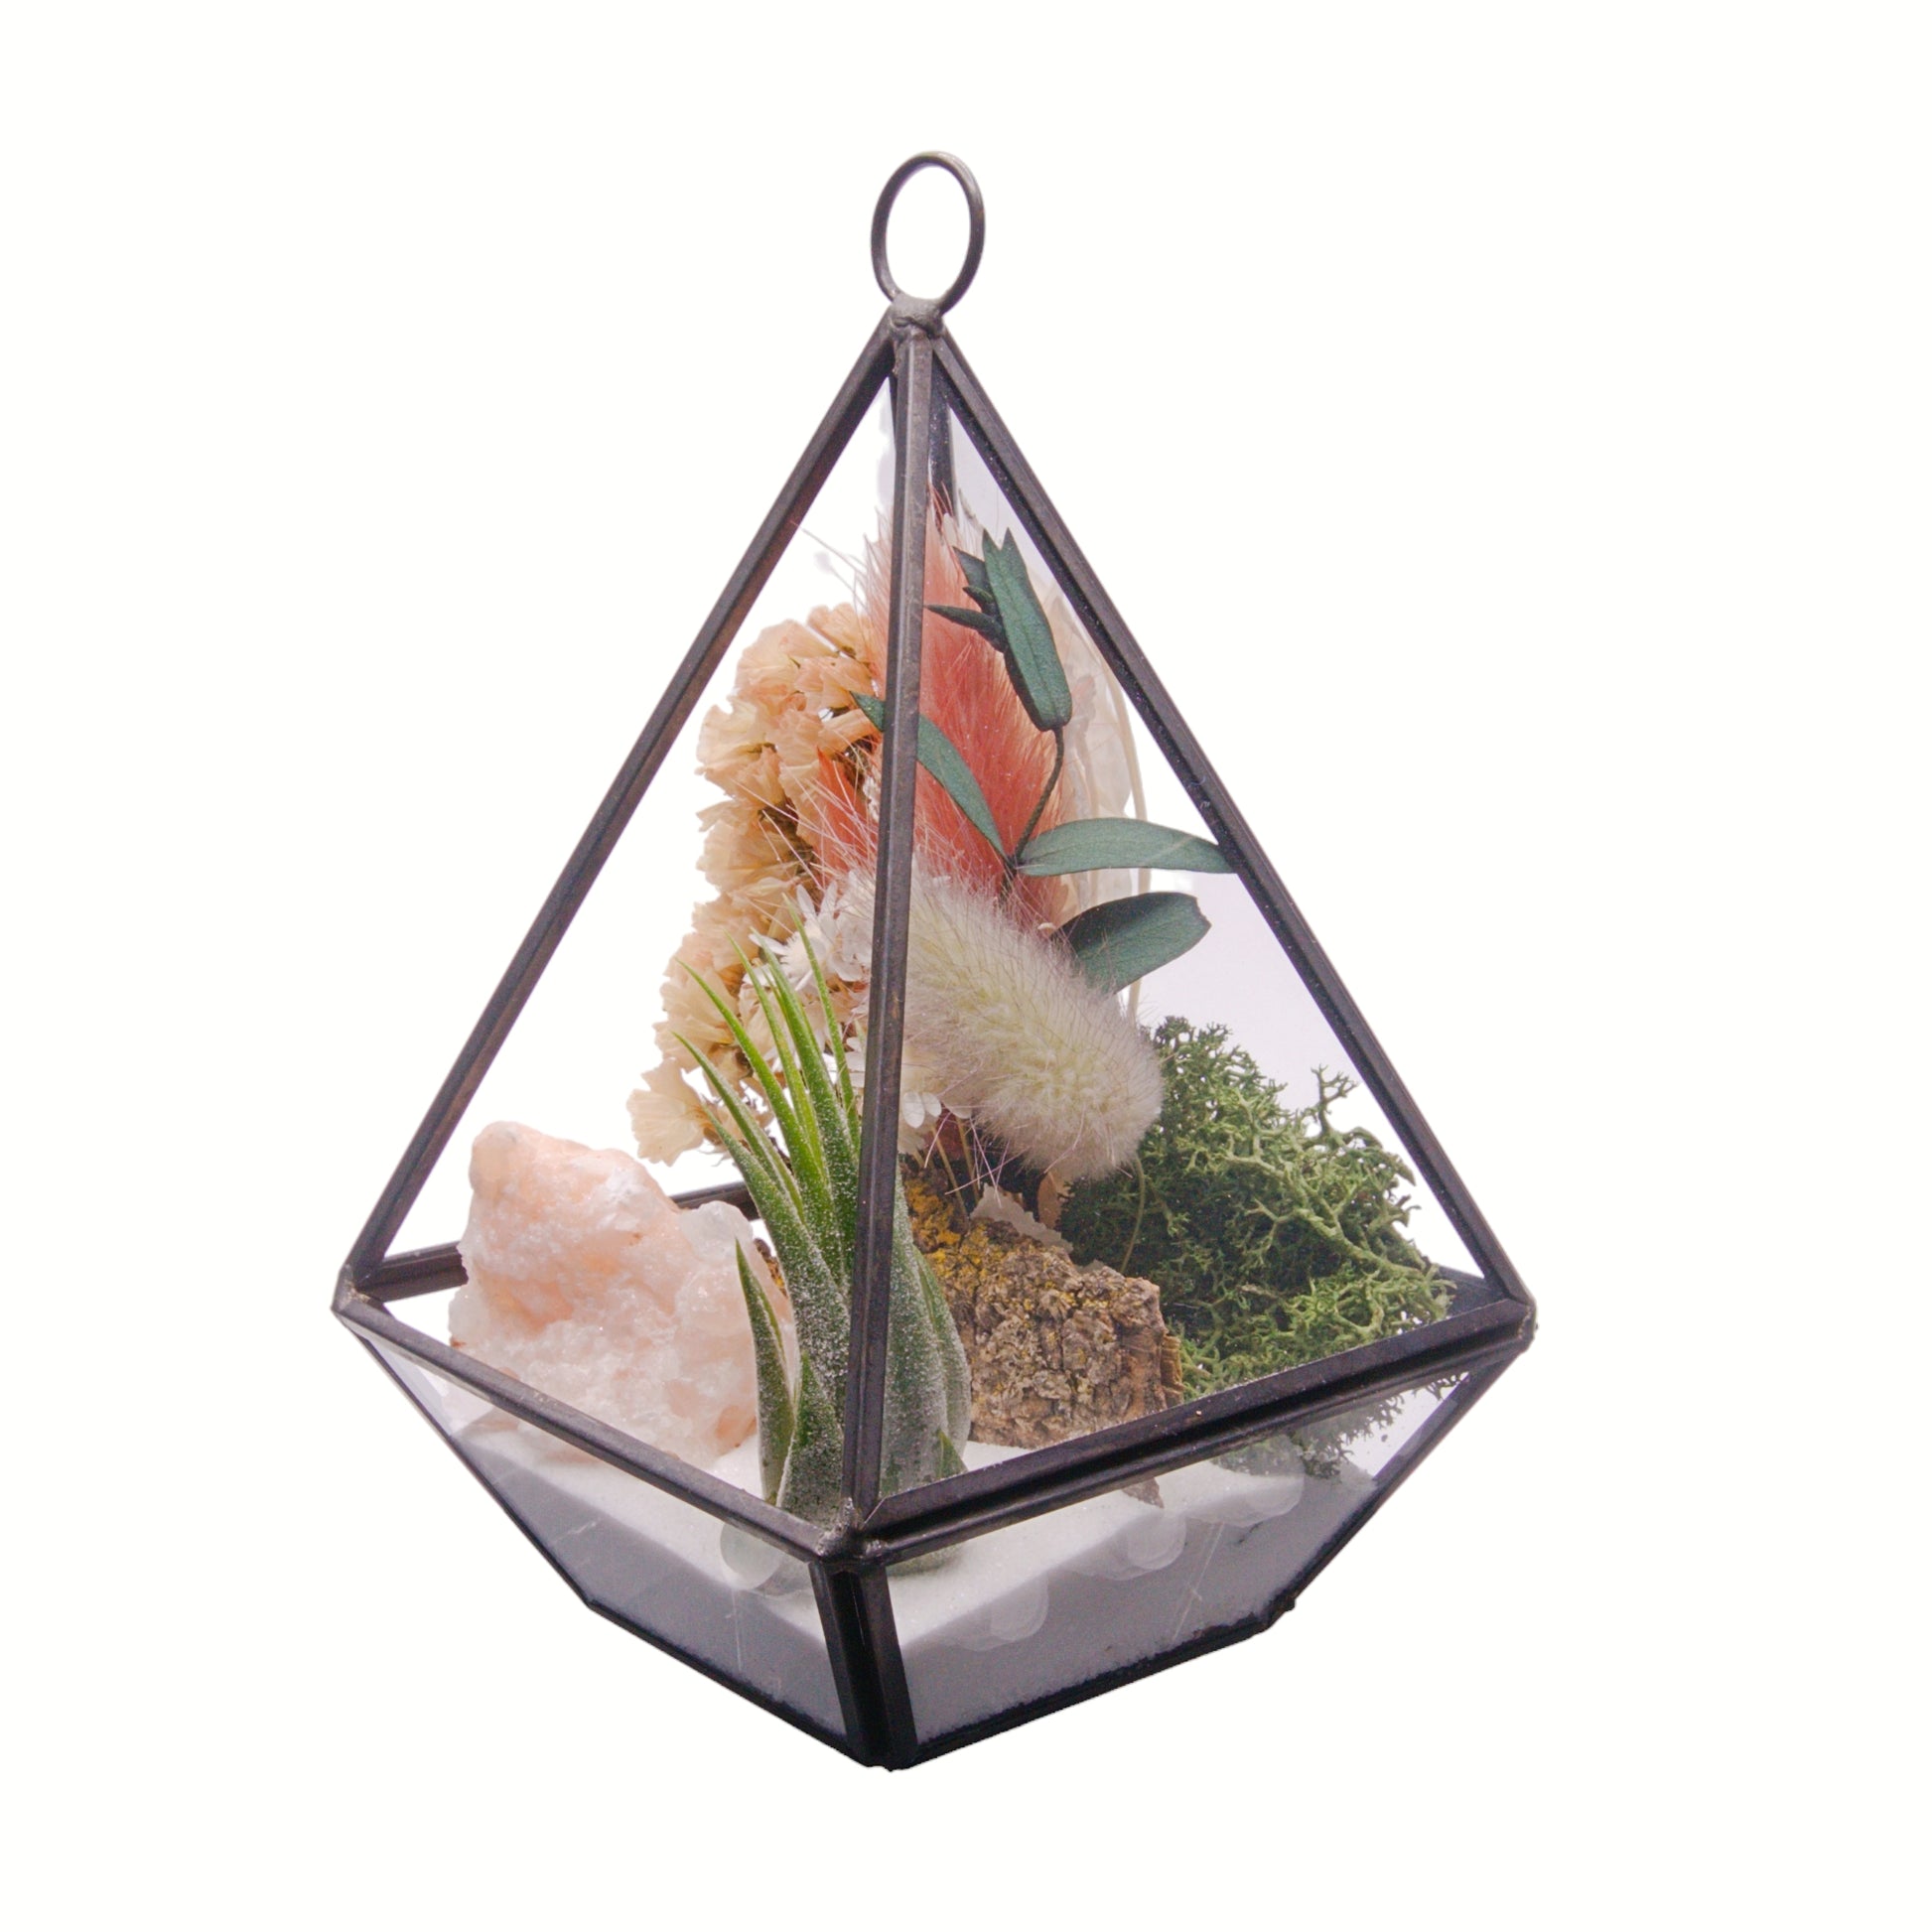 Black Victorian style triangle terrarium with airplant, dried flowers, tri-coloured calcite crystal